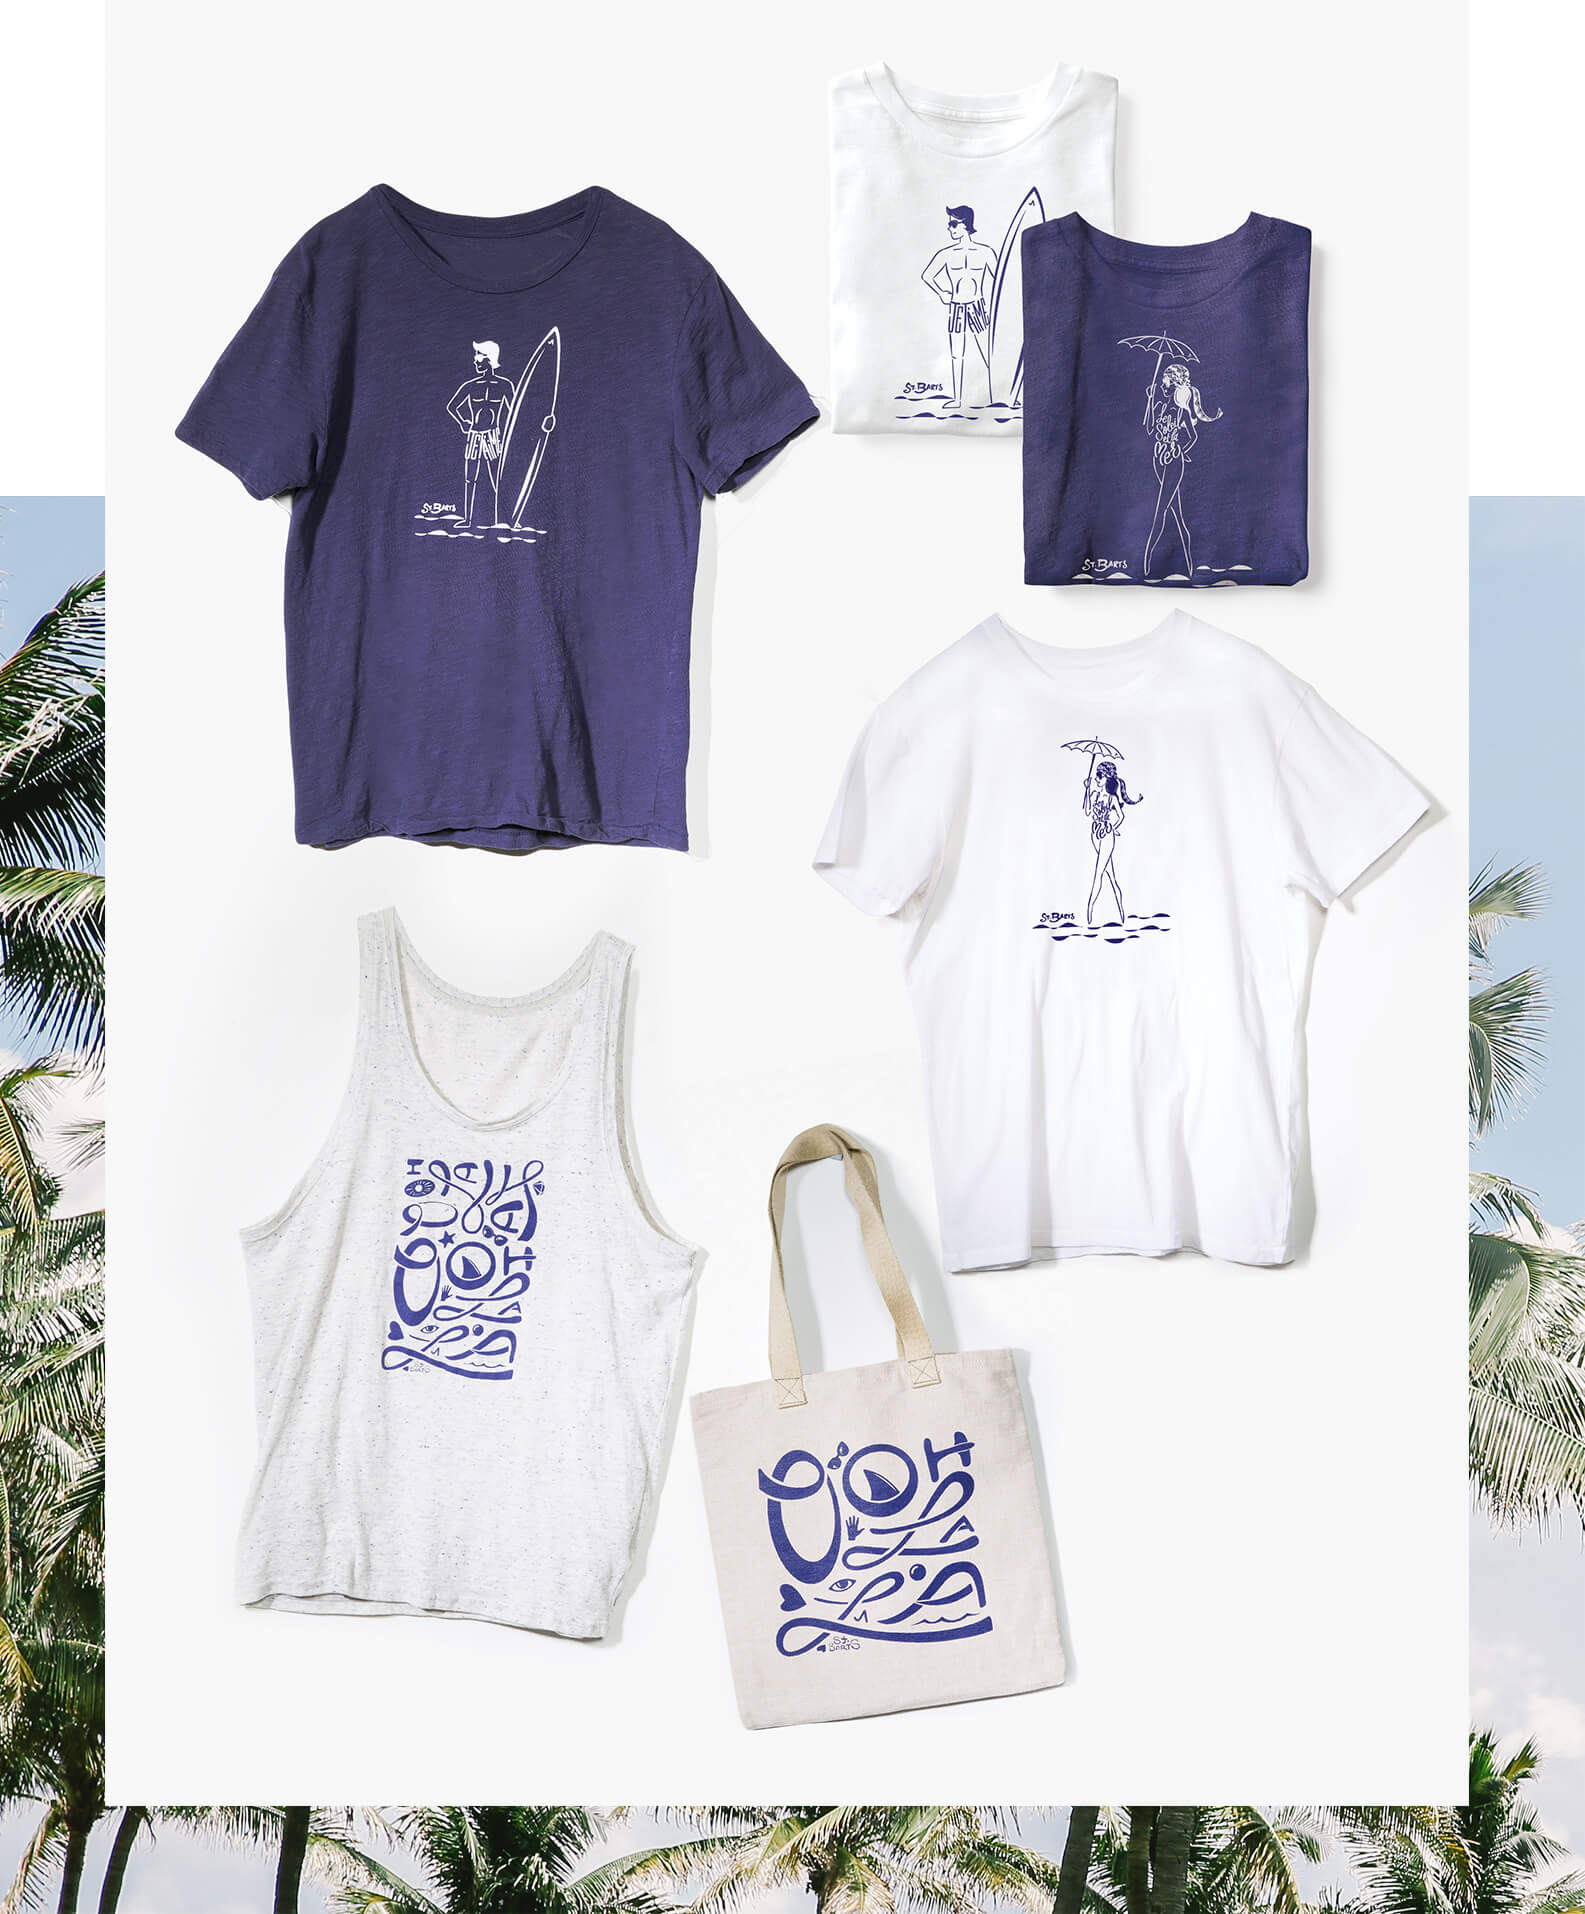 St Barths illustration on apparel by Jacober Creative